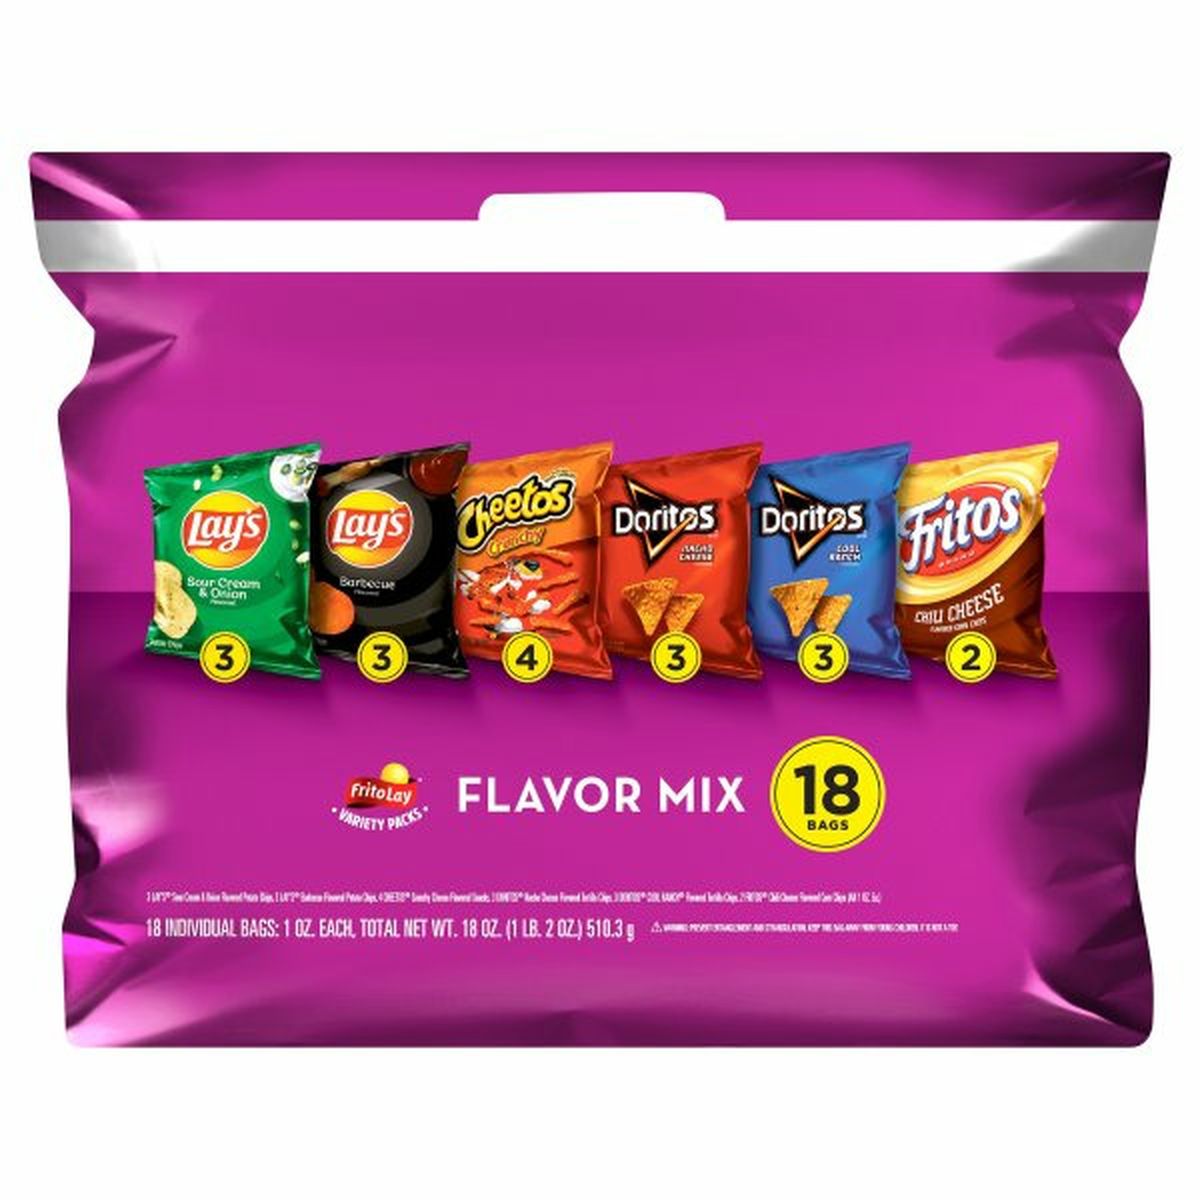 Calories in Frito Lay's Snacks, Flavor Mix